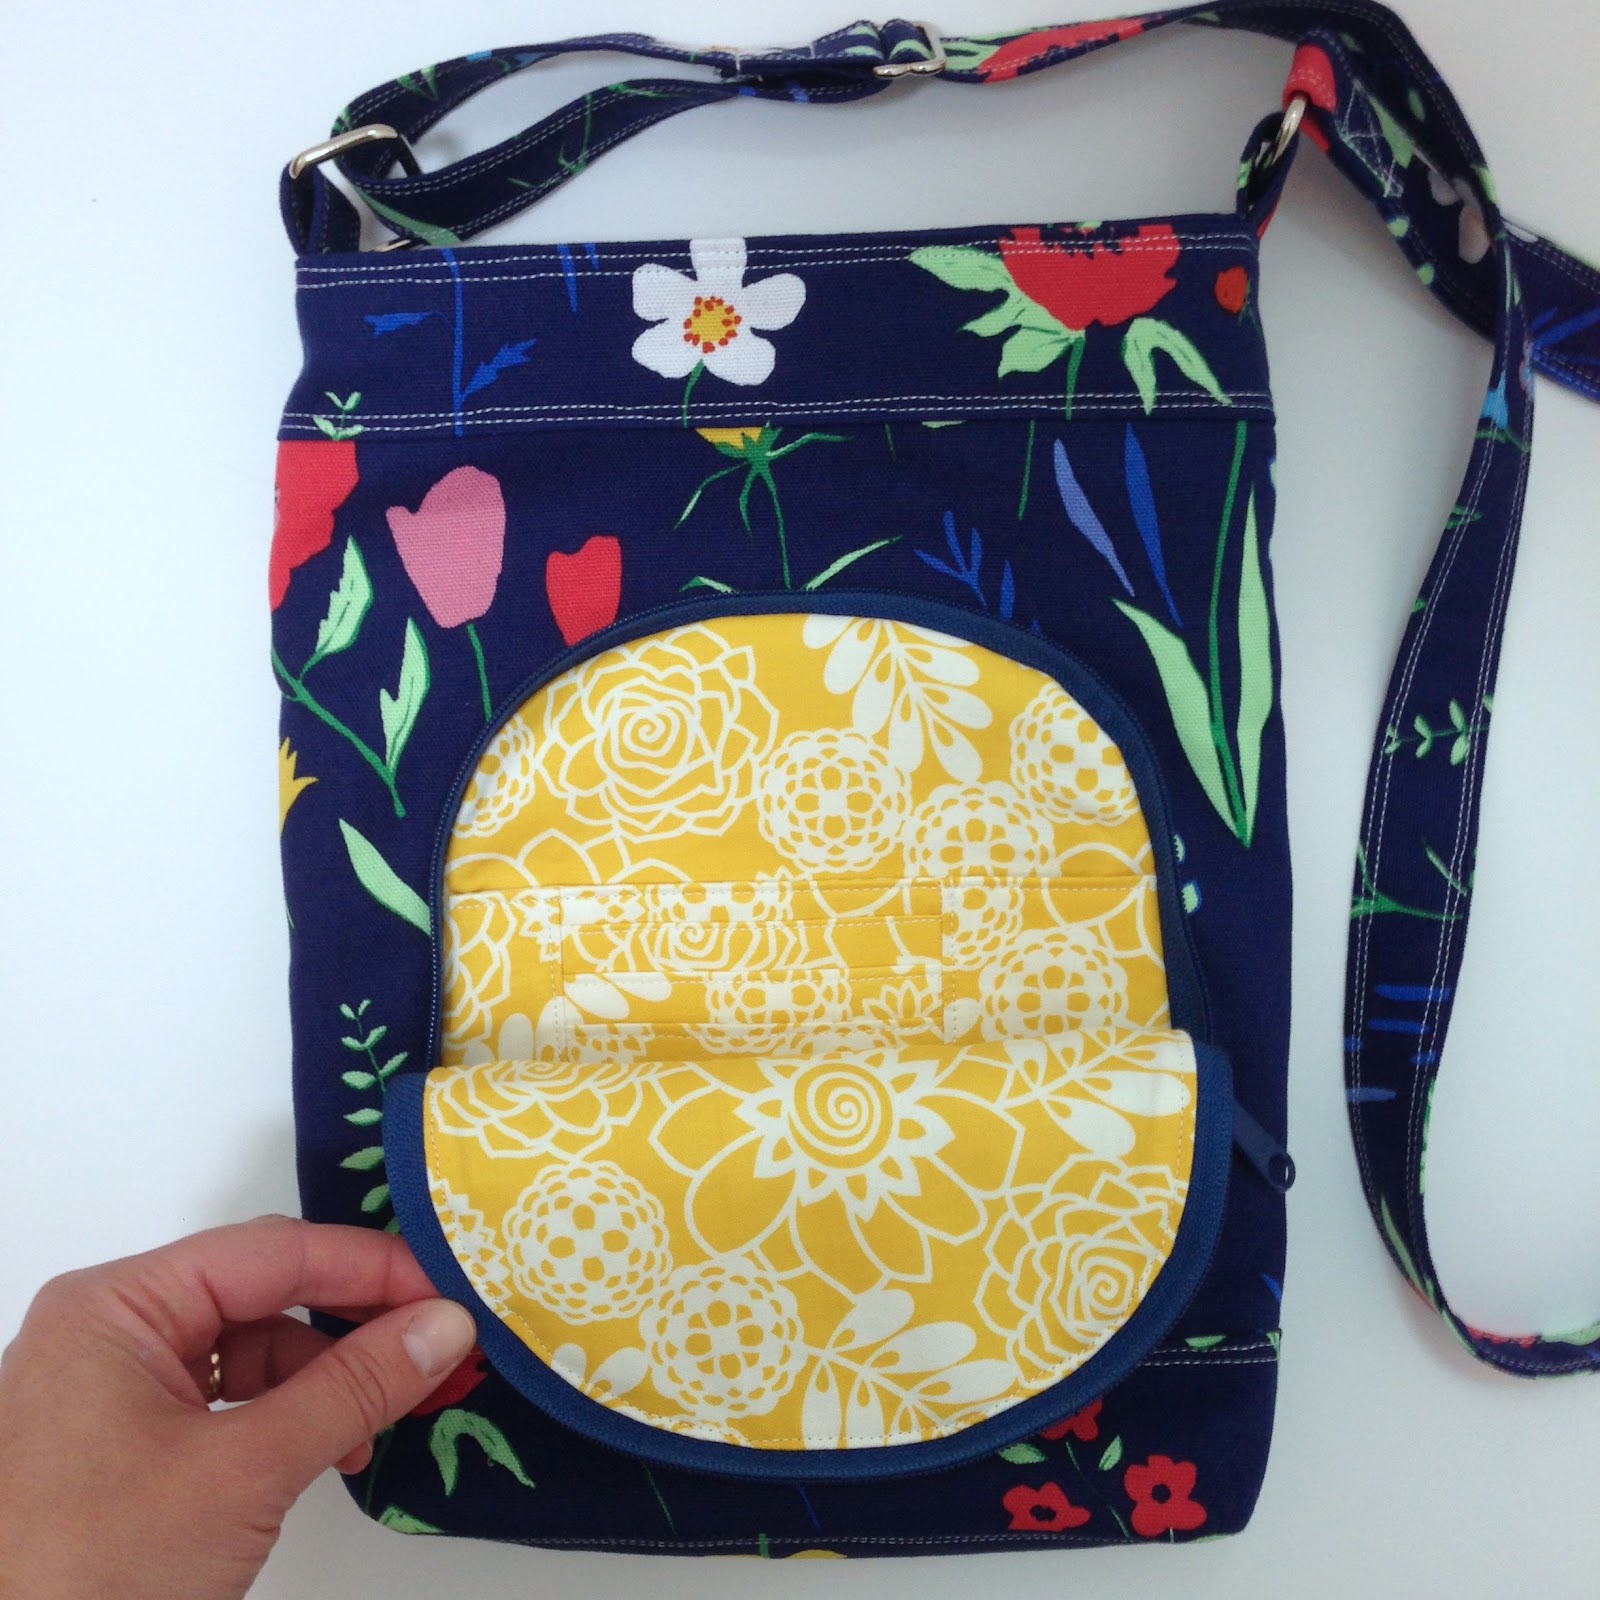 A Bit of Scrap Stuff - Sewing, Quilting, and Fabric Fun: Airport Sling